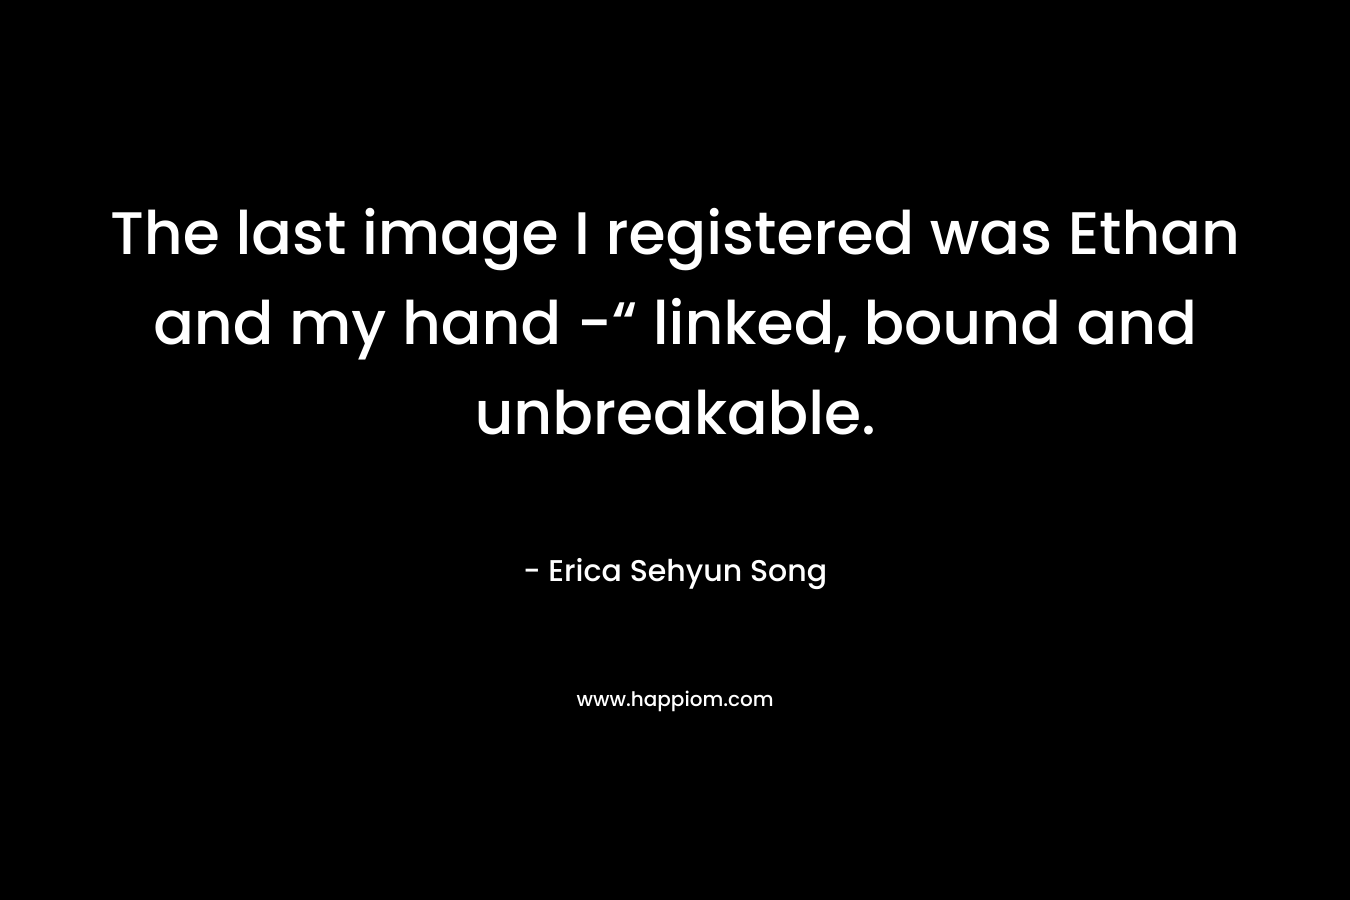 The last image I registered was Ethan and my hand -“ linked, bound and unbreakable.